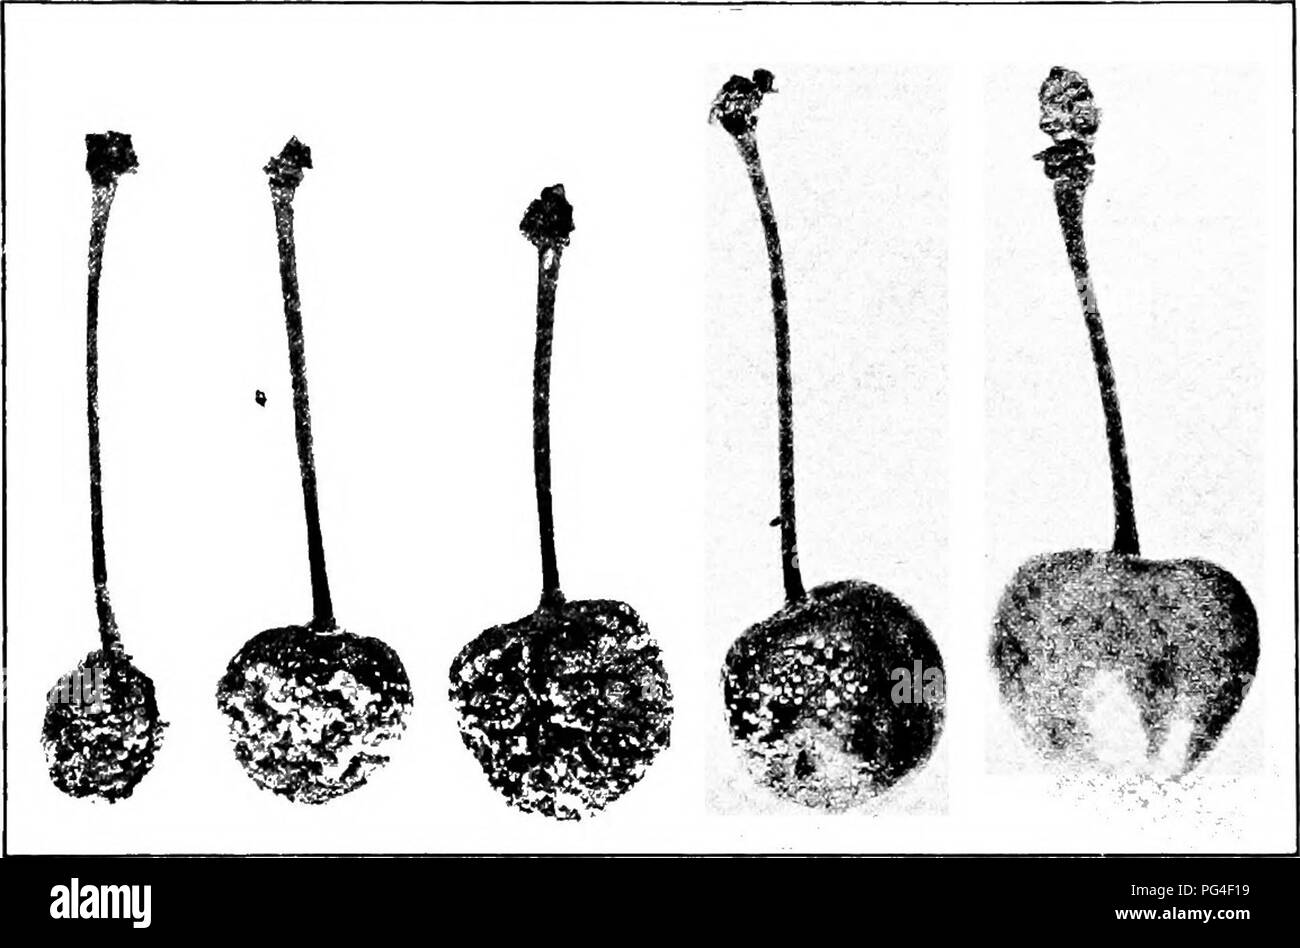 . Diseases of economic plants . Plant diseases. 118 DISEASES OF ECONOMIC PLANTS The results are shown in the accompanying figures. The trees, located in Illinois, were sprayed May 20, June 20, and July 17, the first spra3ang being about a month after blooming, the second just after picking.. Fig. 52. — Brown rot (sclerotiniose) showing various stages of decay. After Clinton. Rust. See peach. Black knot {Plowrightia morbosa (Schw.) Sacc). — As upon the plum, this knot causes serious injury to the cherry. In some sections it has spread to the wild cherry and plum trees in such abundance as to re Stock Photo